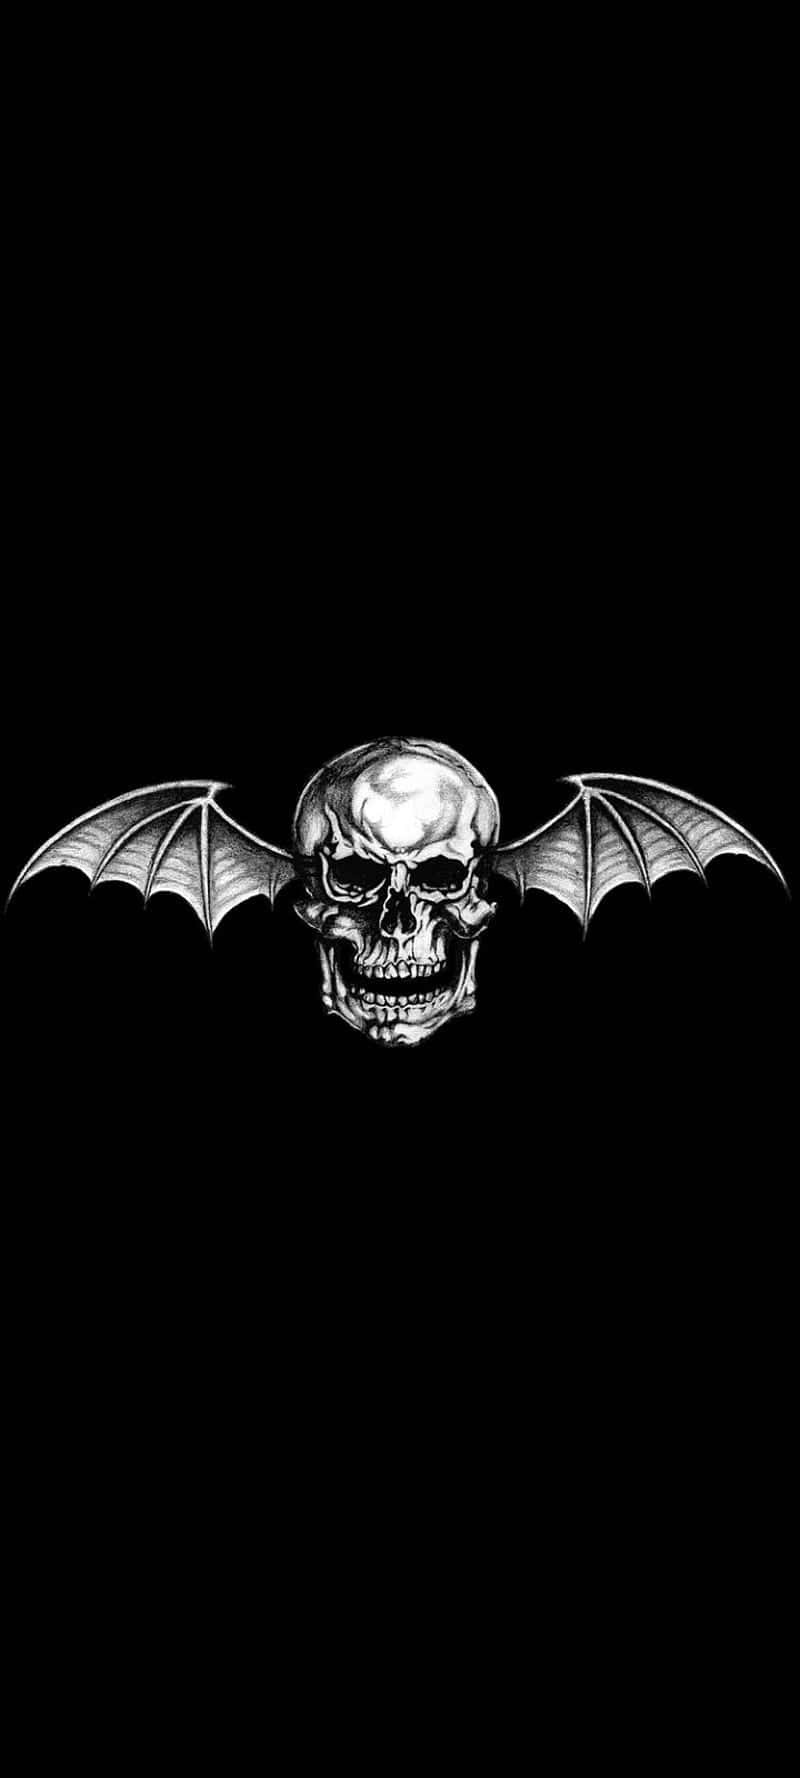 A Skull With Wings On A Black Background Wallpaper